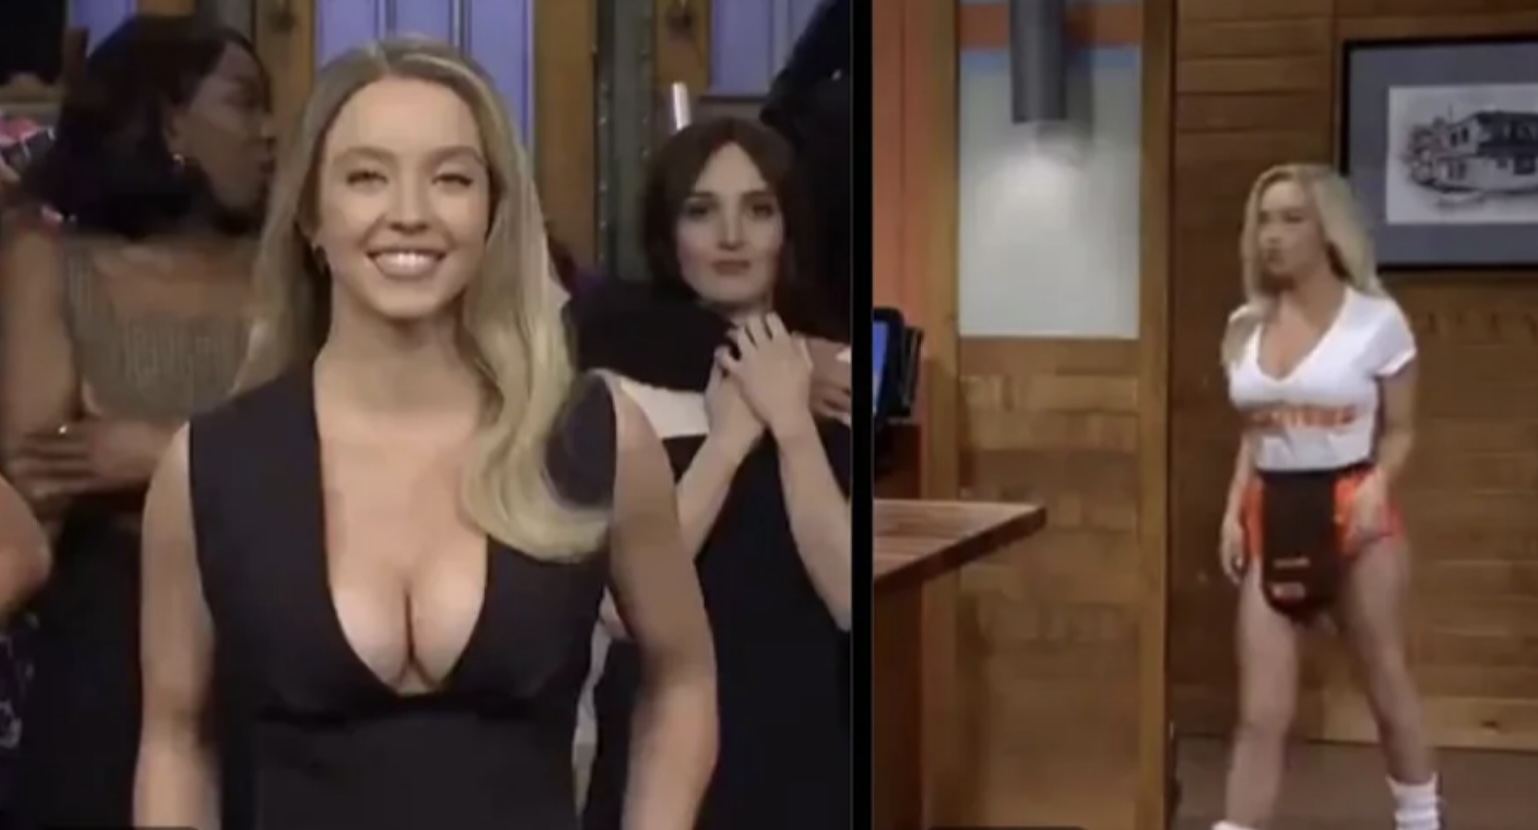 Sydney Sweeney's cleavage causes controversy as SNL host stuns in revealing dress